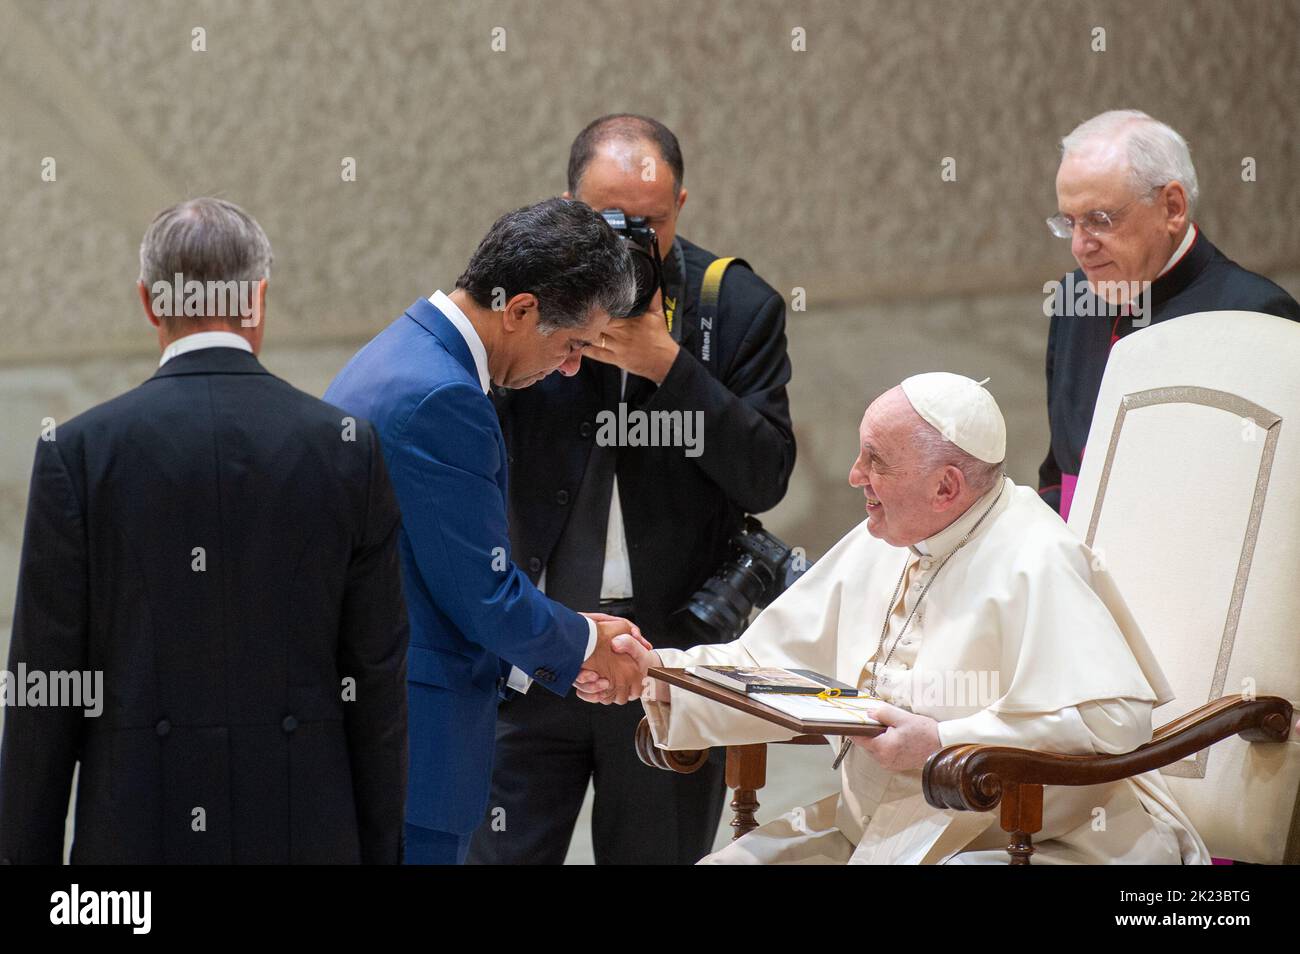 Rome, Italy. 22nd Sep, 2022. Italy, Rome, Vatican, 22/09/22. Pope Francis greets Punit Renjen, Managing Director of Deloitte Global, during a private audience with members of DELOITTE Global International in the Paul VI Hall.Italia, Roma, Vaticano, 22/09/22. Papa Francesco saluta Punit Renjen, Amministratore delegato di Deloitte Global, durante un'udienza privata con i membri di DELOITTE Global International nell'Aula Paolo VI. Photograph by Massimiliano MIGLIORATO/Catholic Press Photo Credit: Independent Photo Agency/Alamy Live News Stock Photo